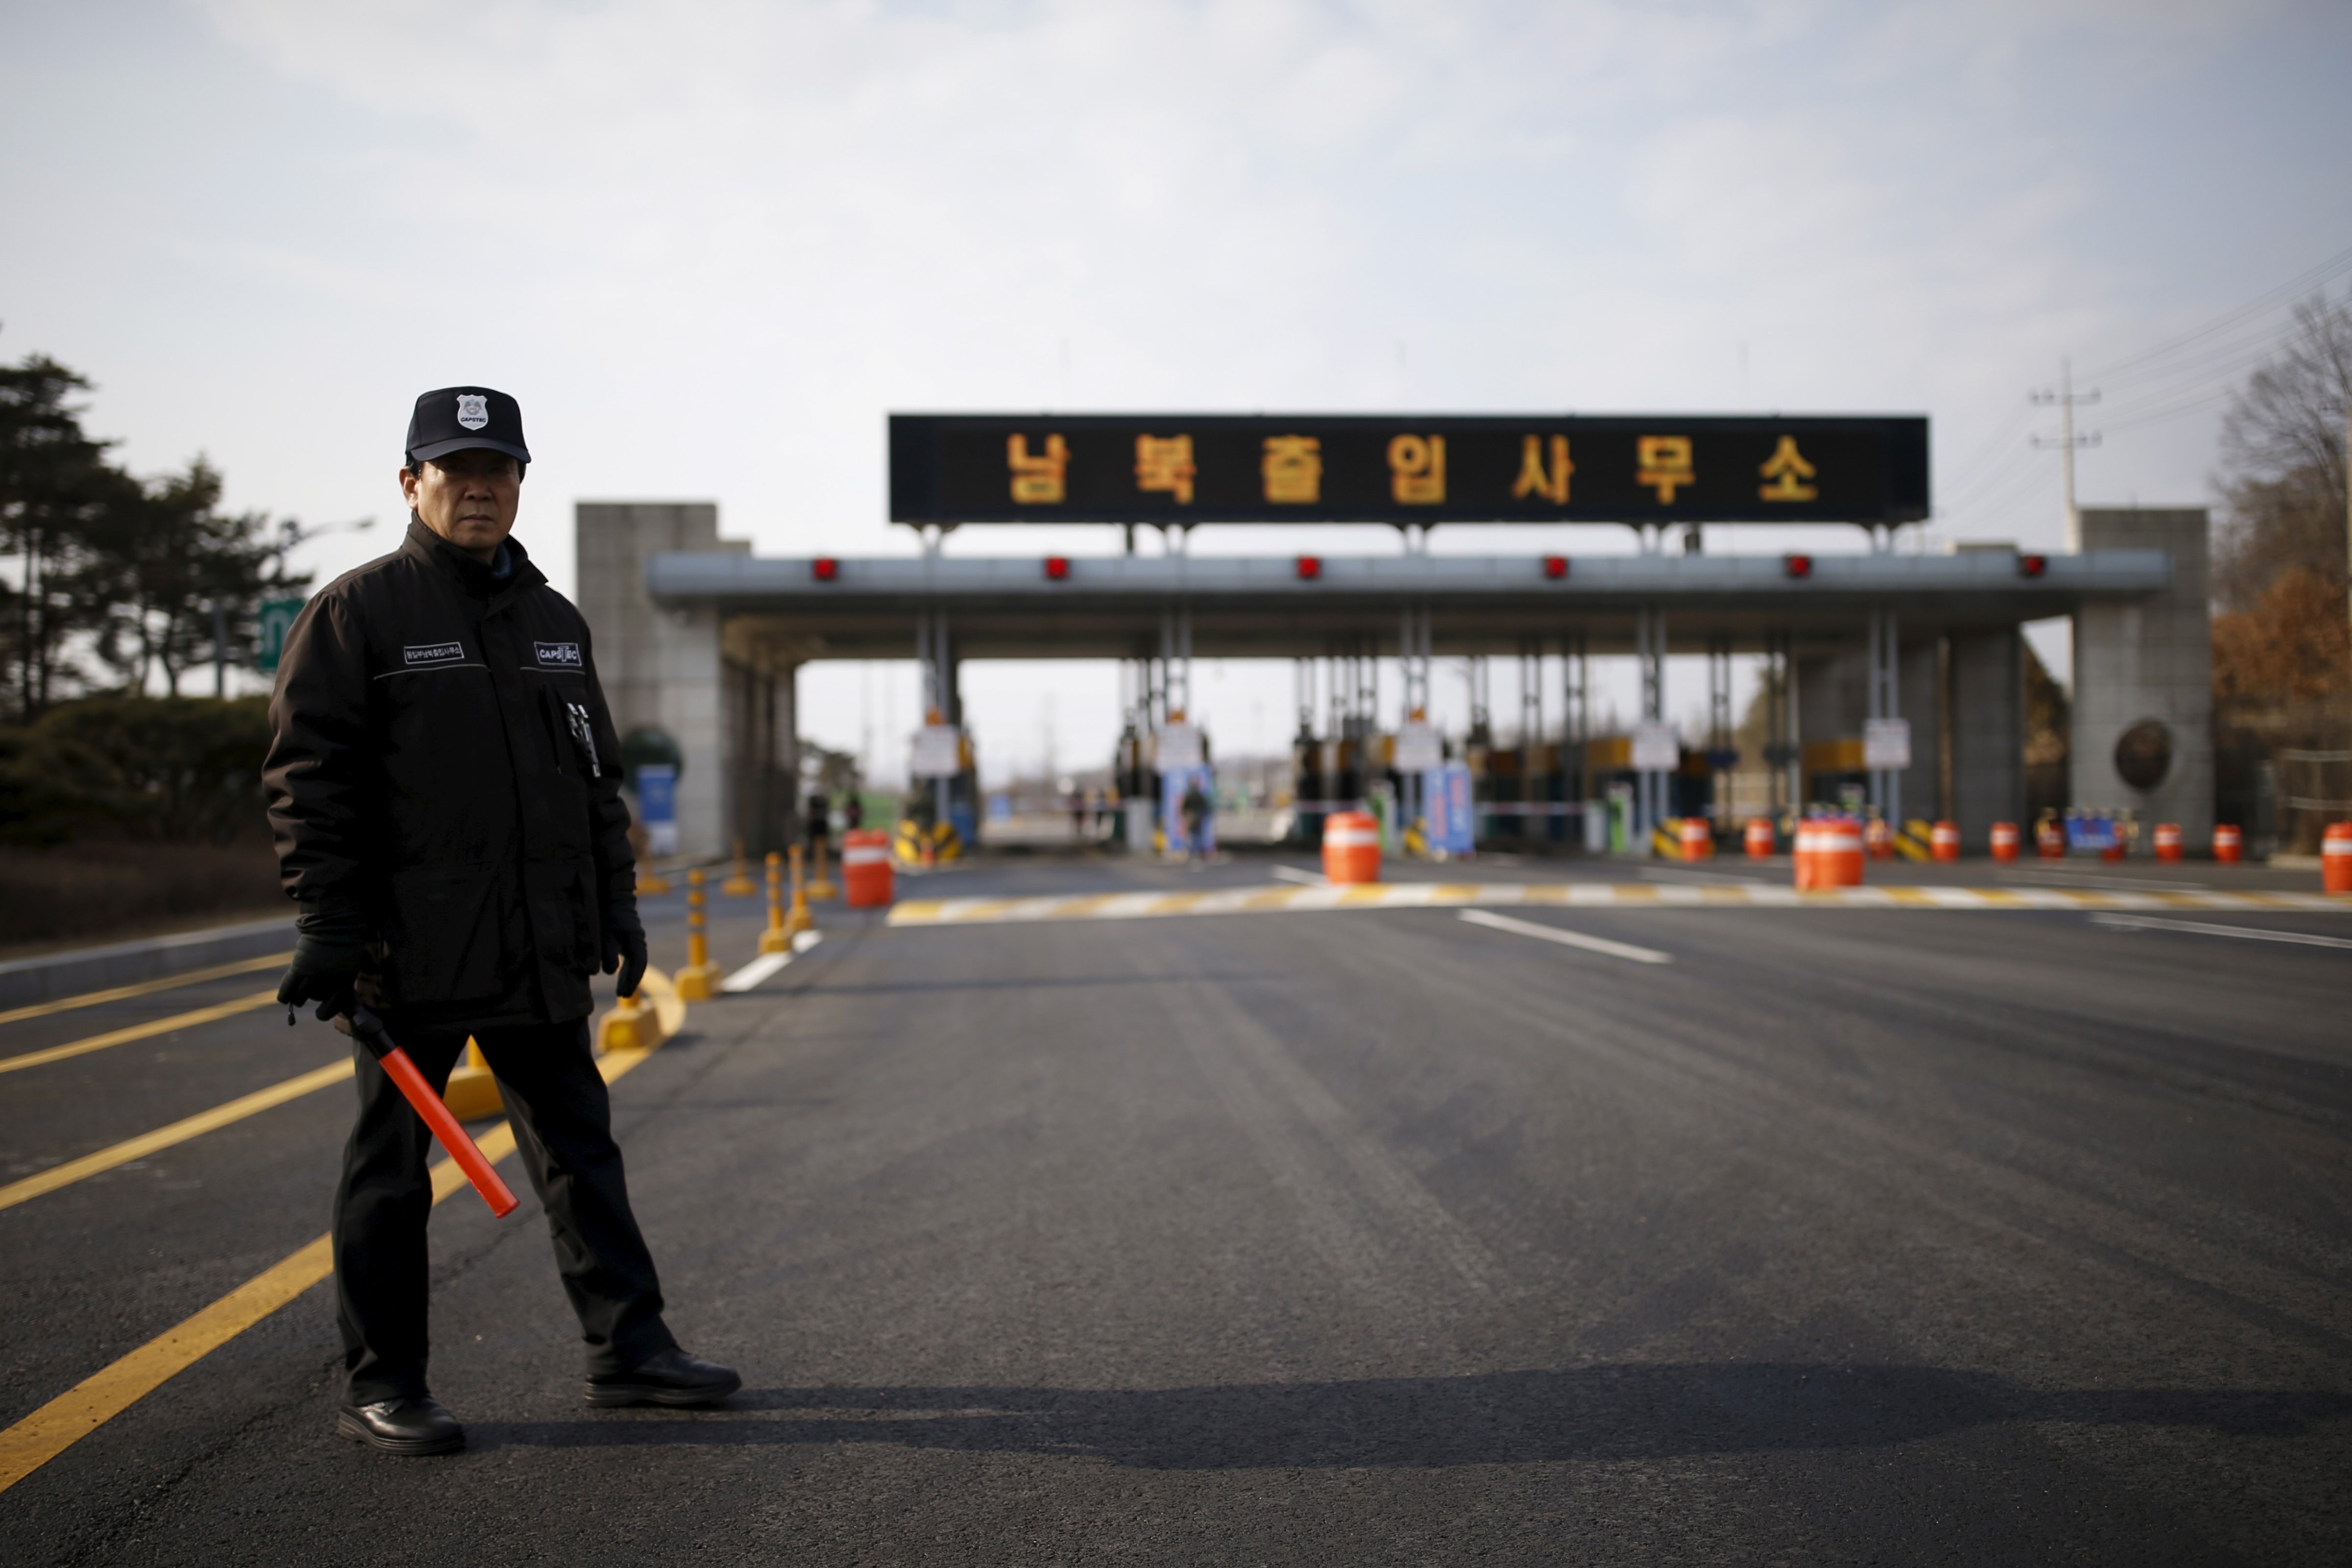 A South Korean security guard stands guard on an empty road that leads to the Kaesong Industrial Complex at the South's Customs, Immigration and Quarantine, just south of the demilitarized zone separating the two Koreas, in Paju, South Korea, on Feb. 11, 2016 (Kim Hong-Ji—Reuters)